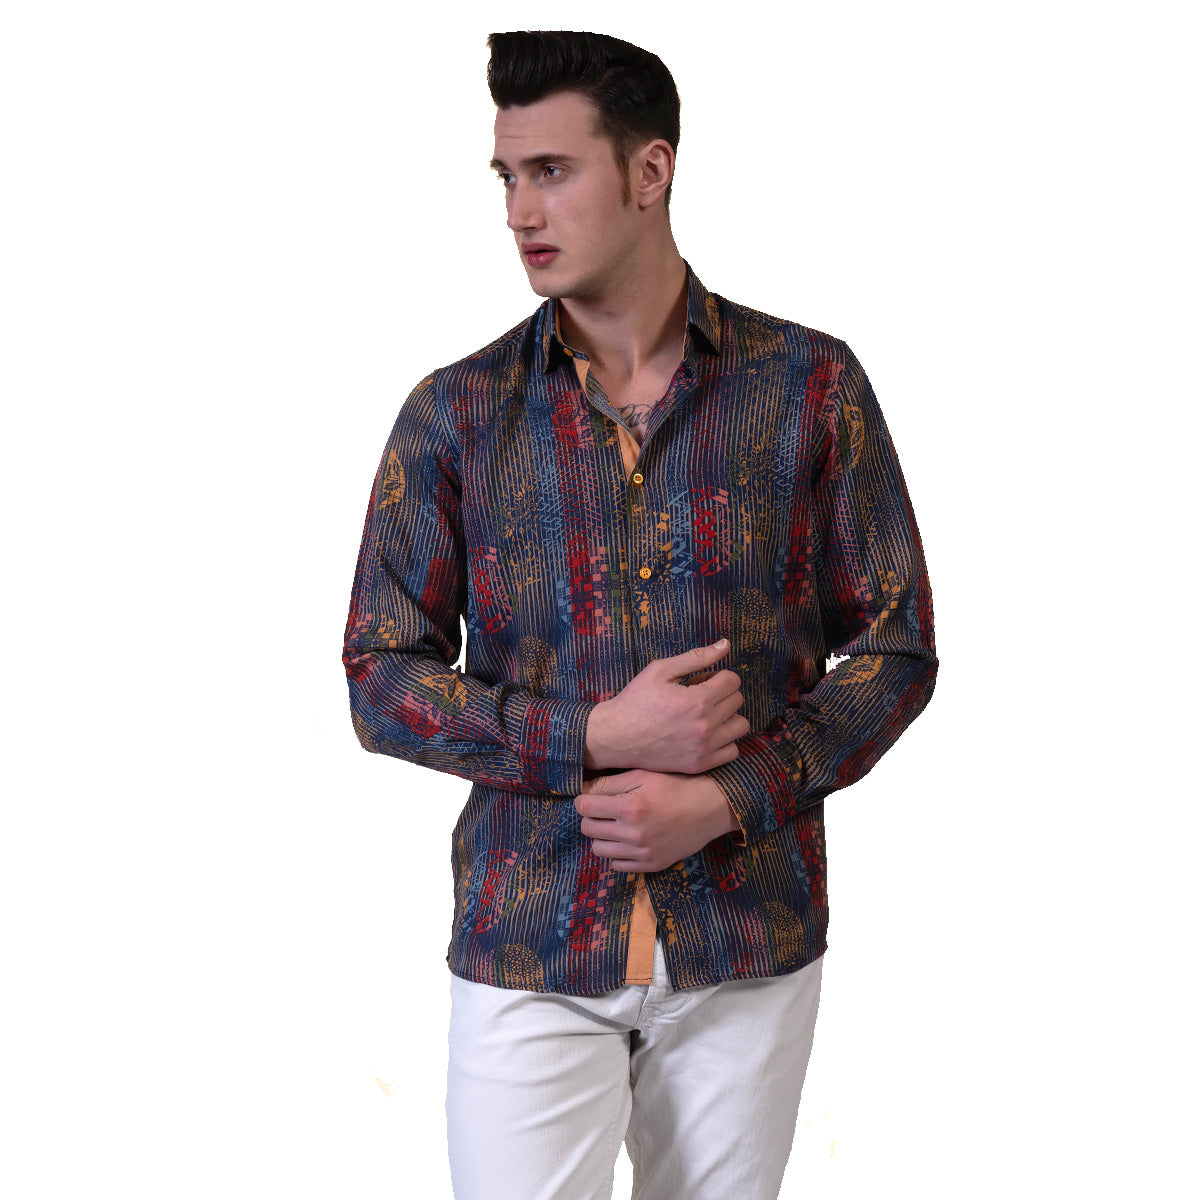 Brown Floral Mens Slim Fit Designer Dress Shirt - tailored Cotton Shirts for Work and Casual Wear